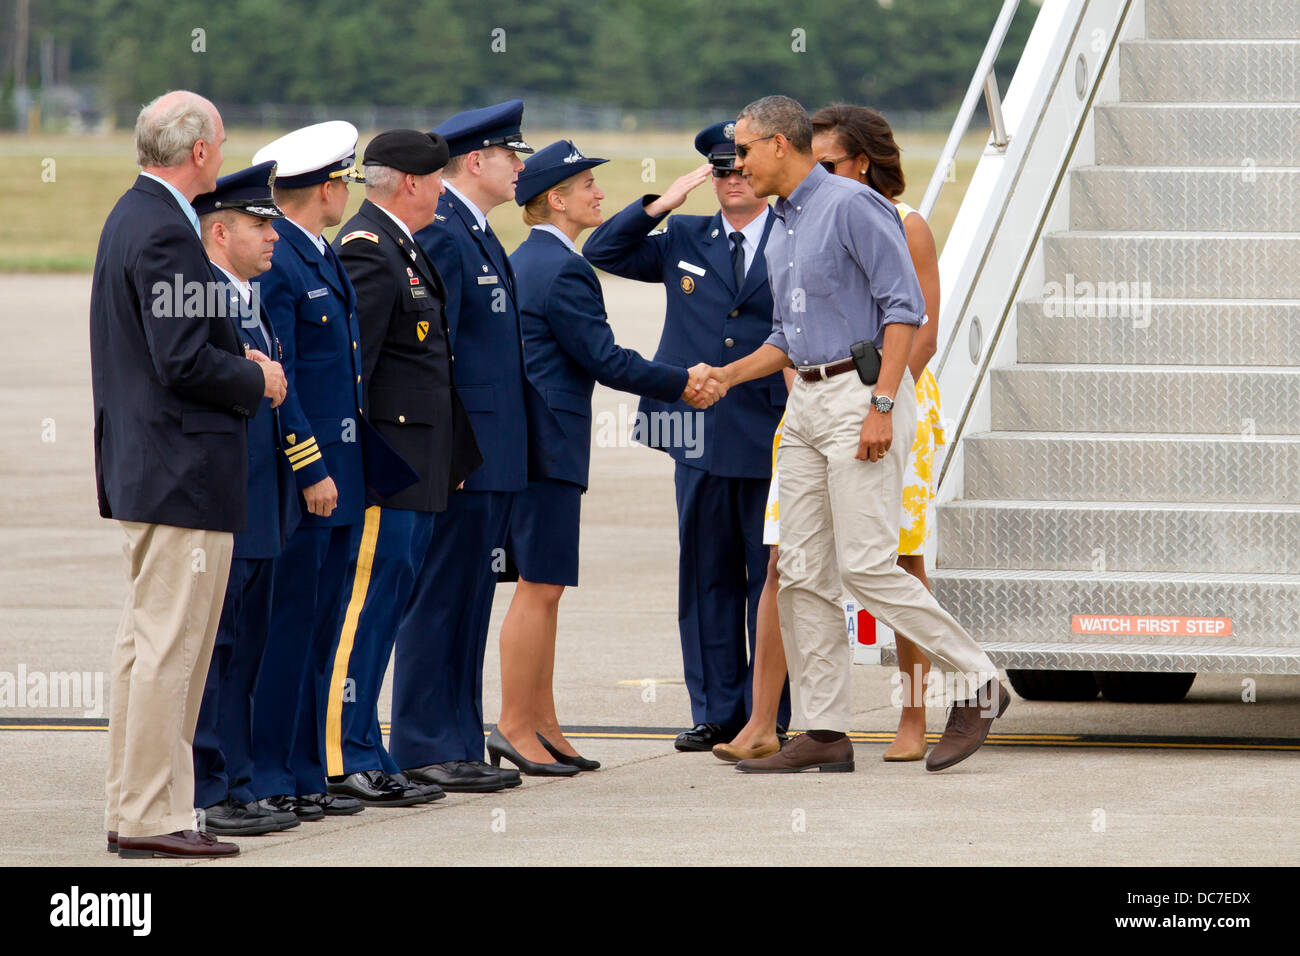 US President Barack Obama greets base commanders after landing aboard Air Force One at Joint Base Cape Cod August 10, 2013 in Buzzards Bay, MA. The Obama's are on their way to Martha's Vineyard for summer vacation. Stock Photo